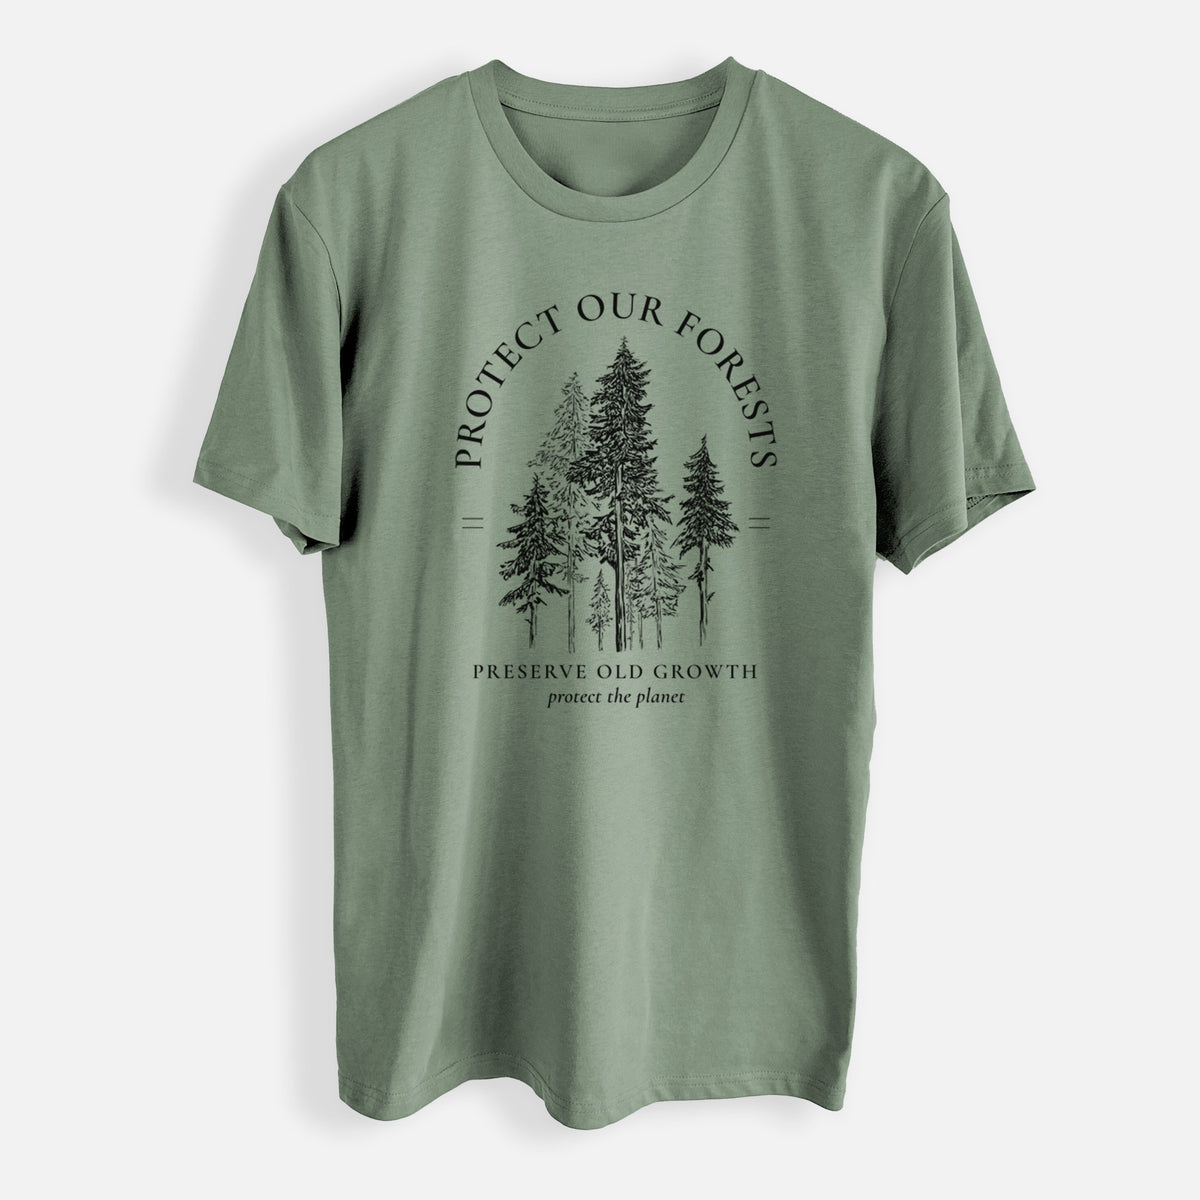 Protect our Forests - Preserve Old Growth - Mens Everyday Staple Tee